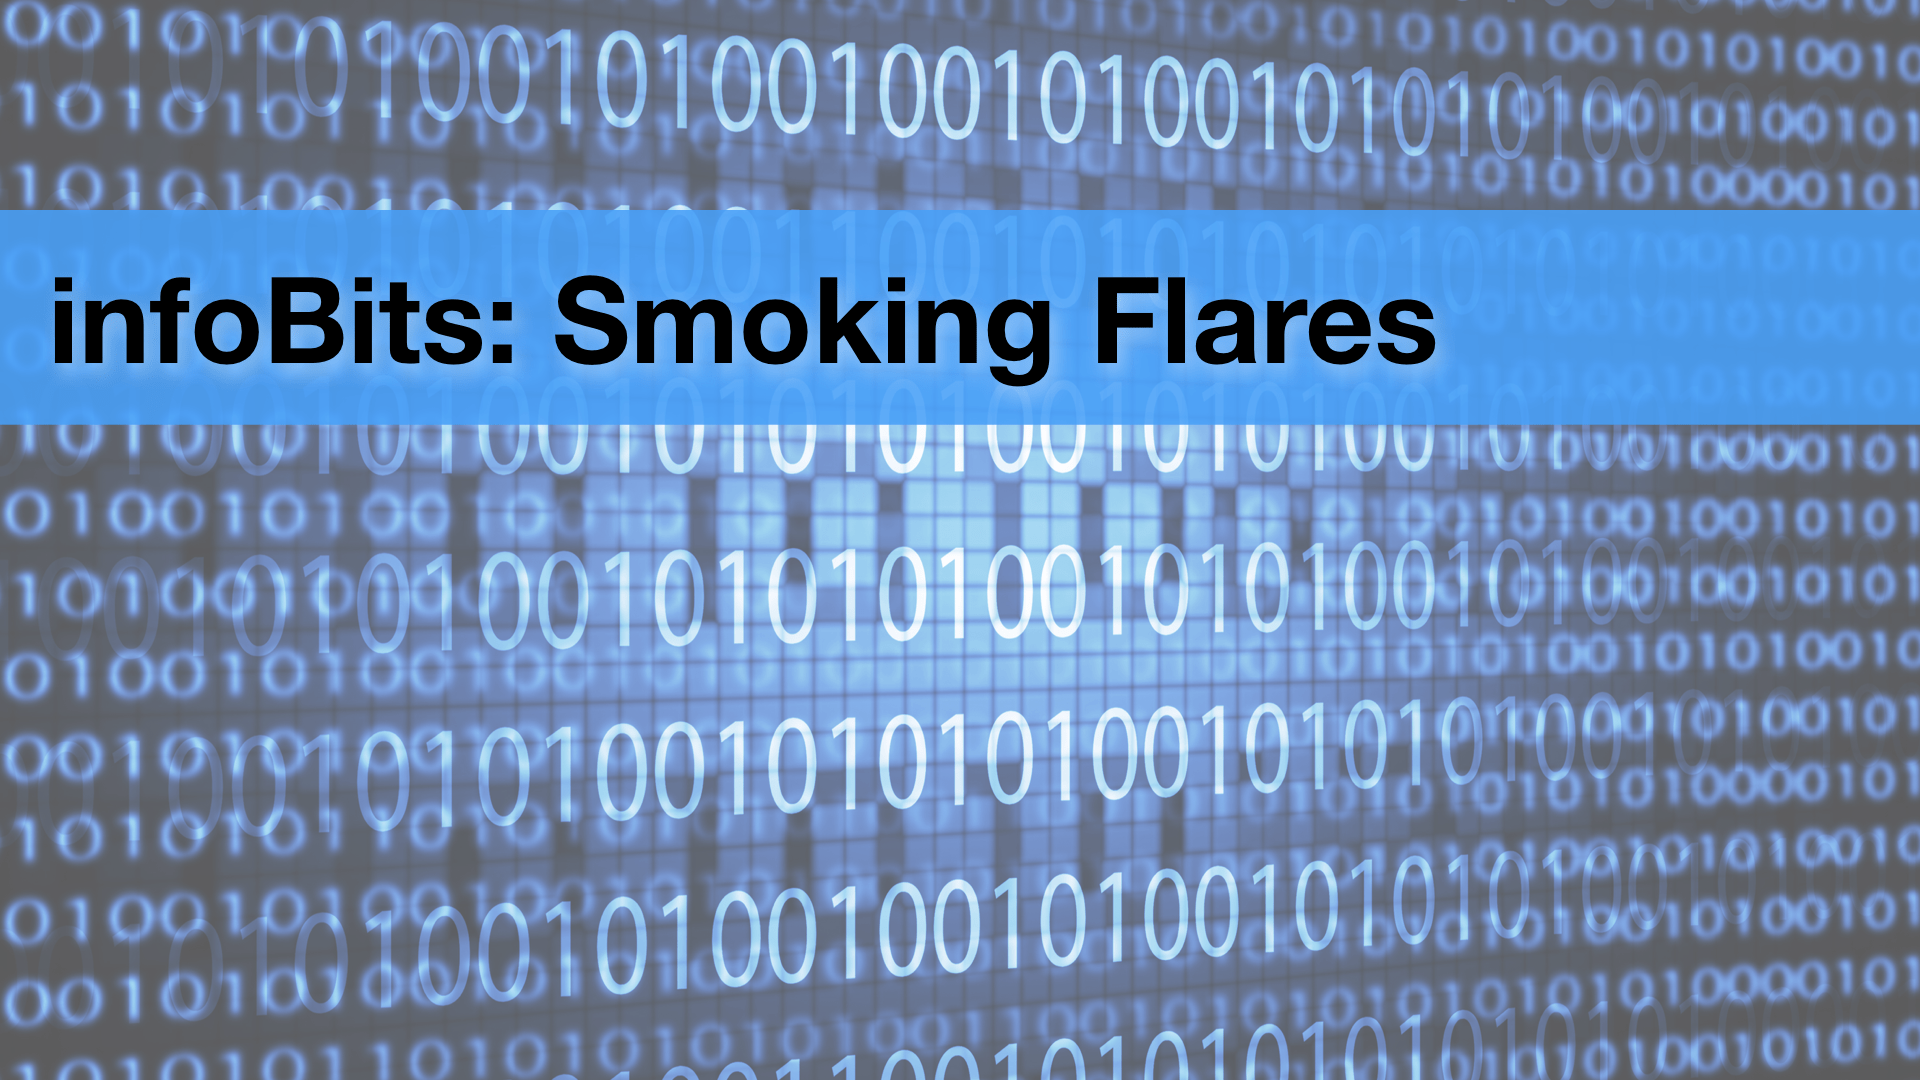 infoBits: 7 Interesting Things About Smoking Flares